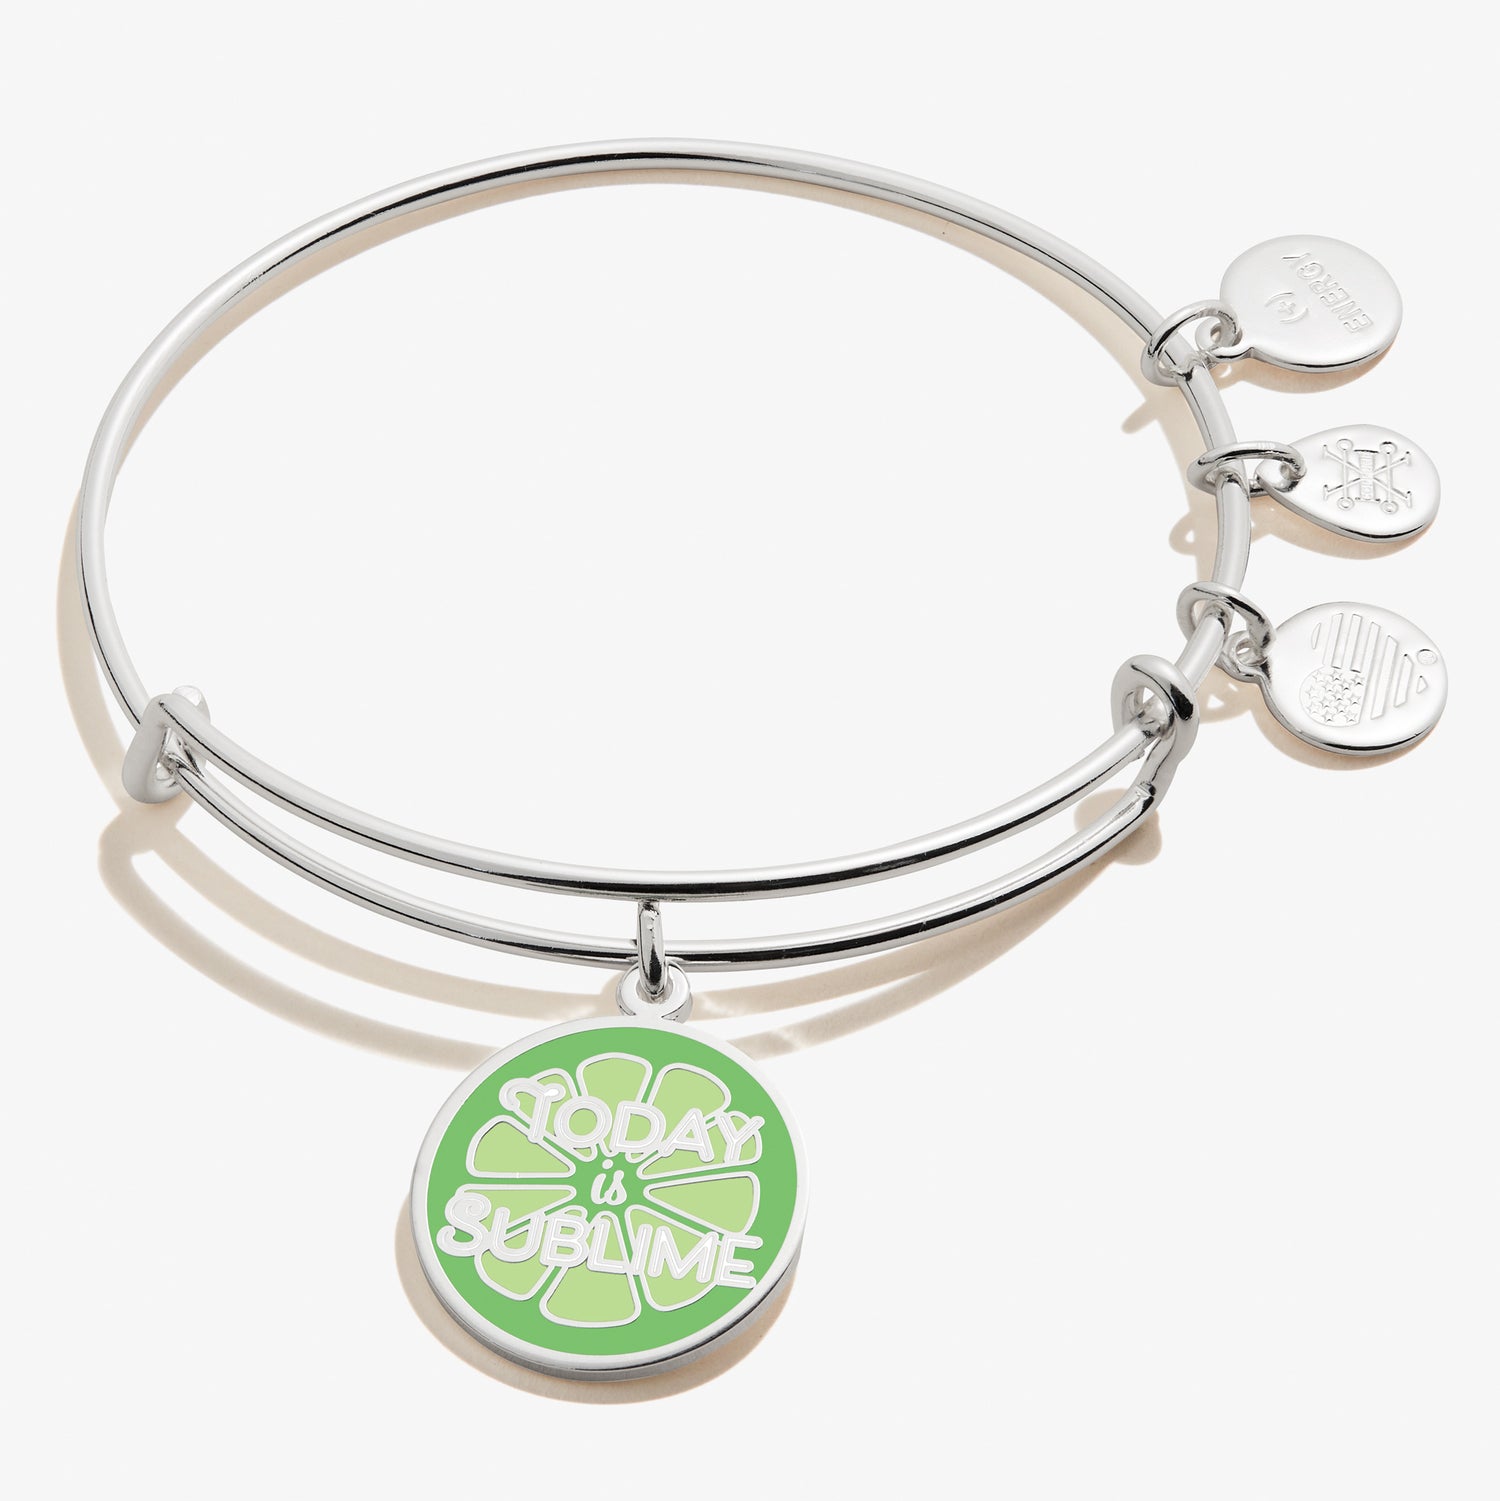 'Today is Sublime' Charm Bangle